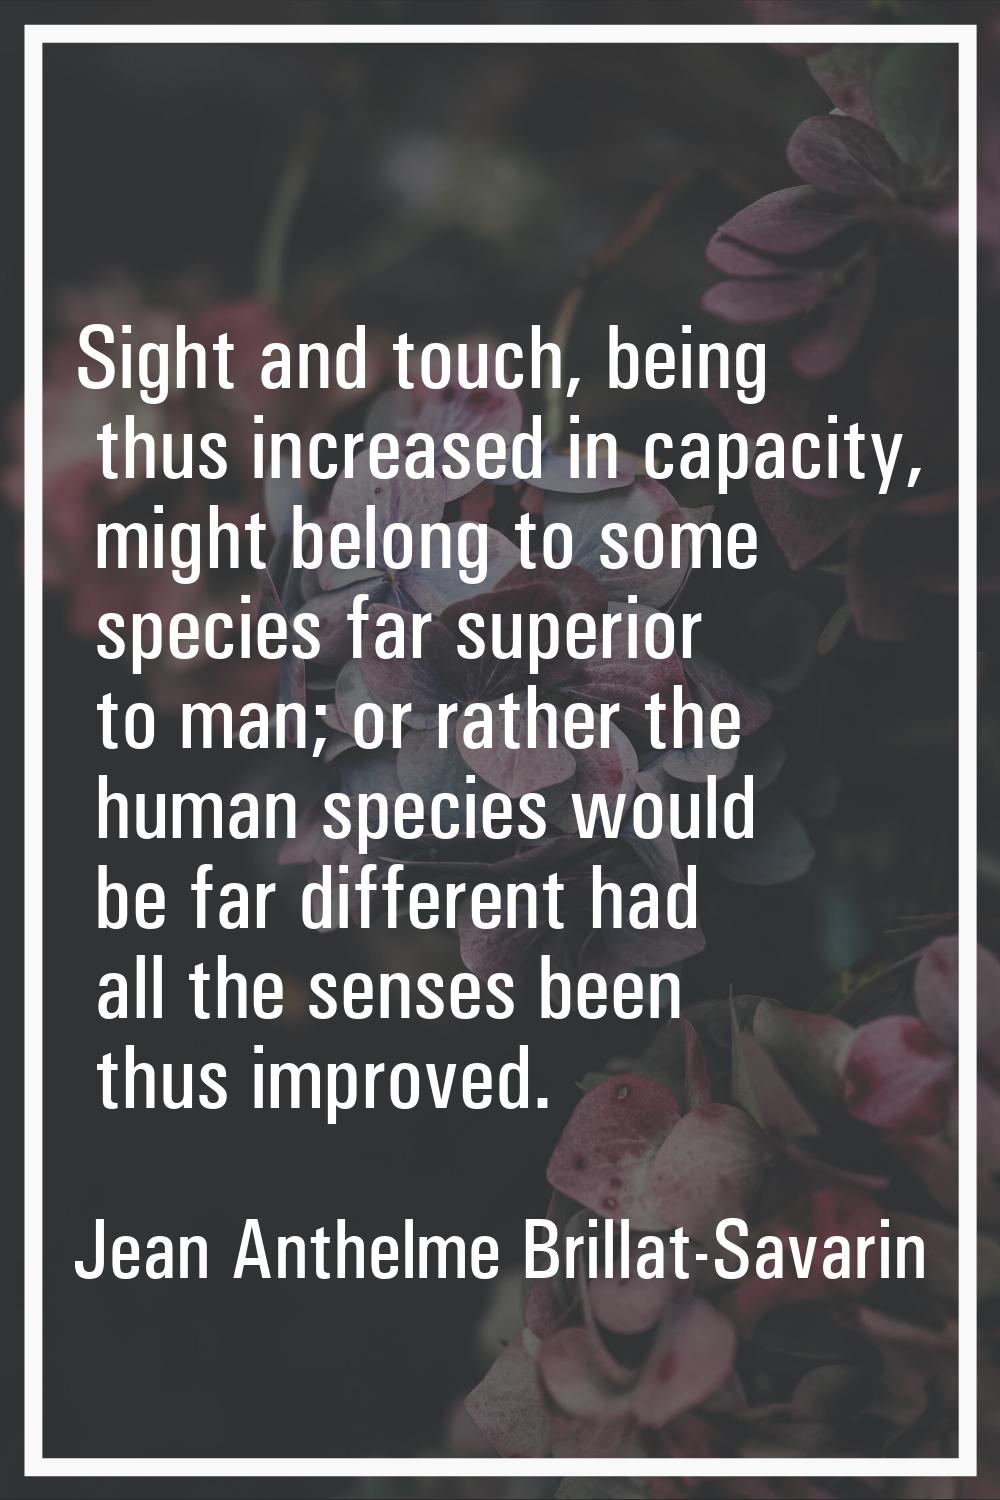 Sight and touch, being thus increased in capacity, might belong to some species far superior to man